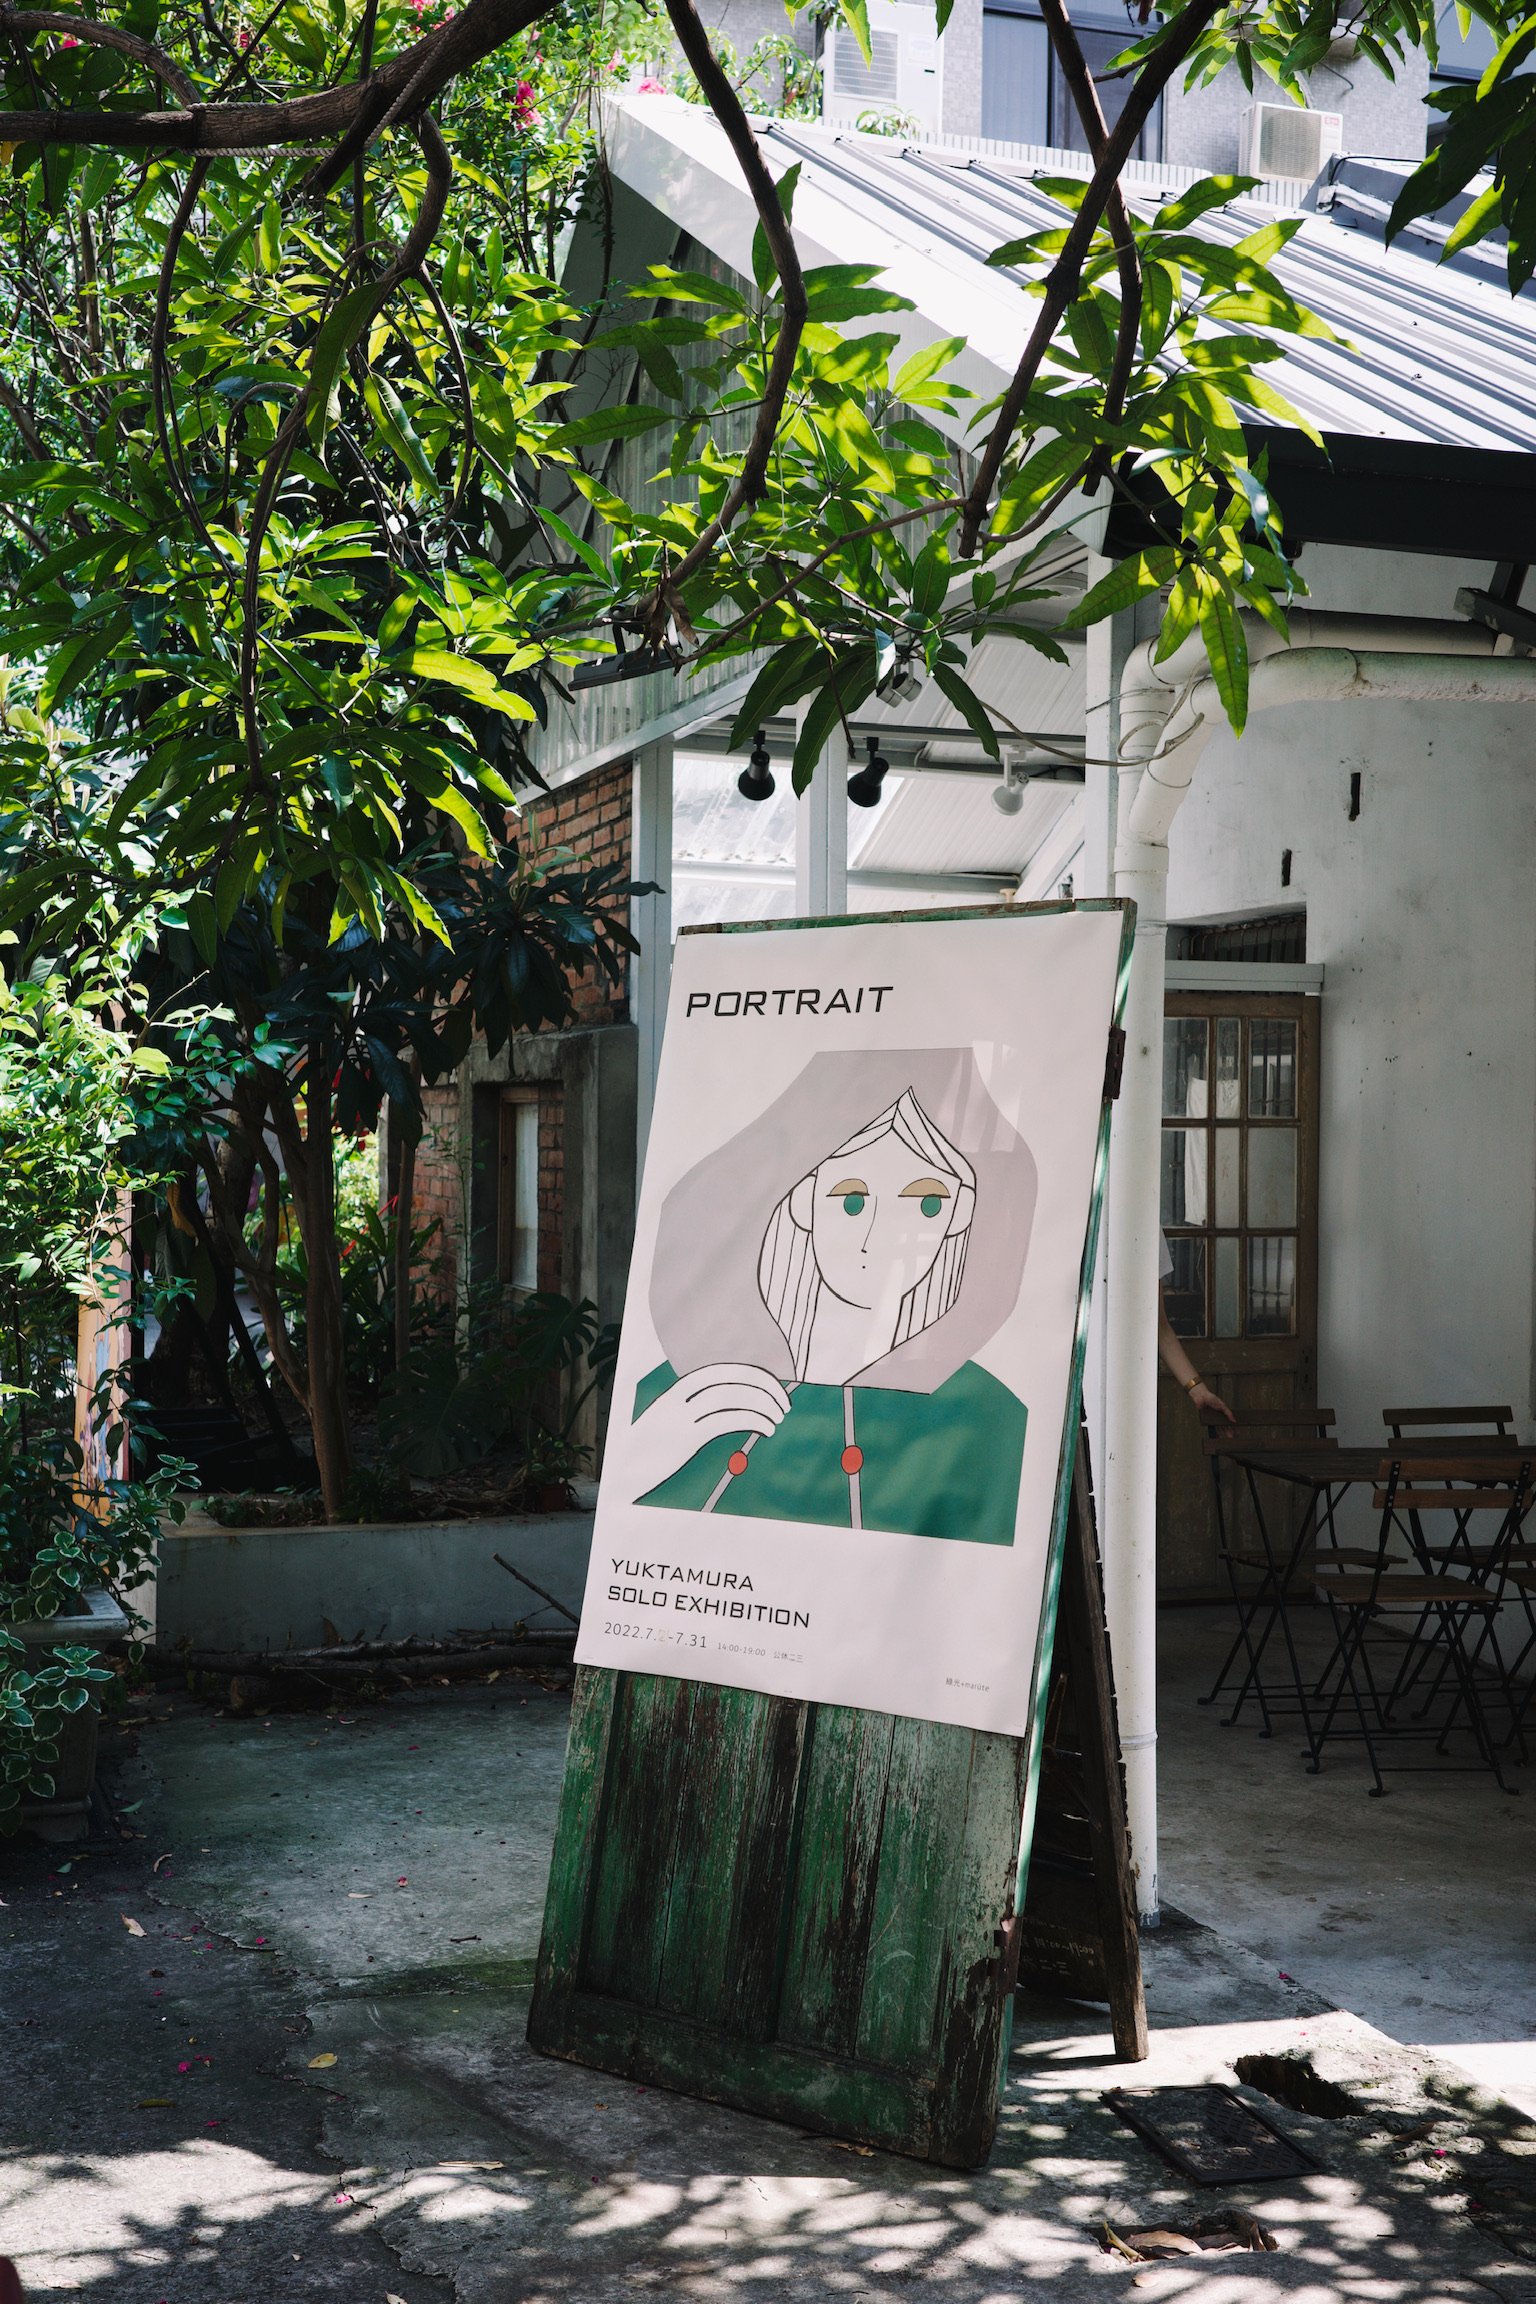 An aged dark green wooden panel, with a white poster reading Portrait, Yuktamura Solo Exhibition, stood in the front yard of a small, old, white structure.